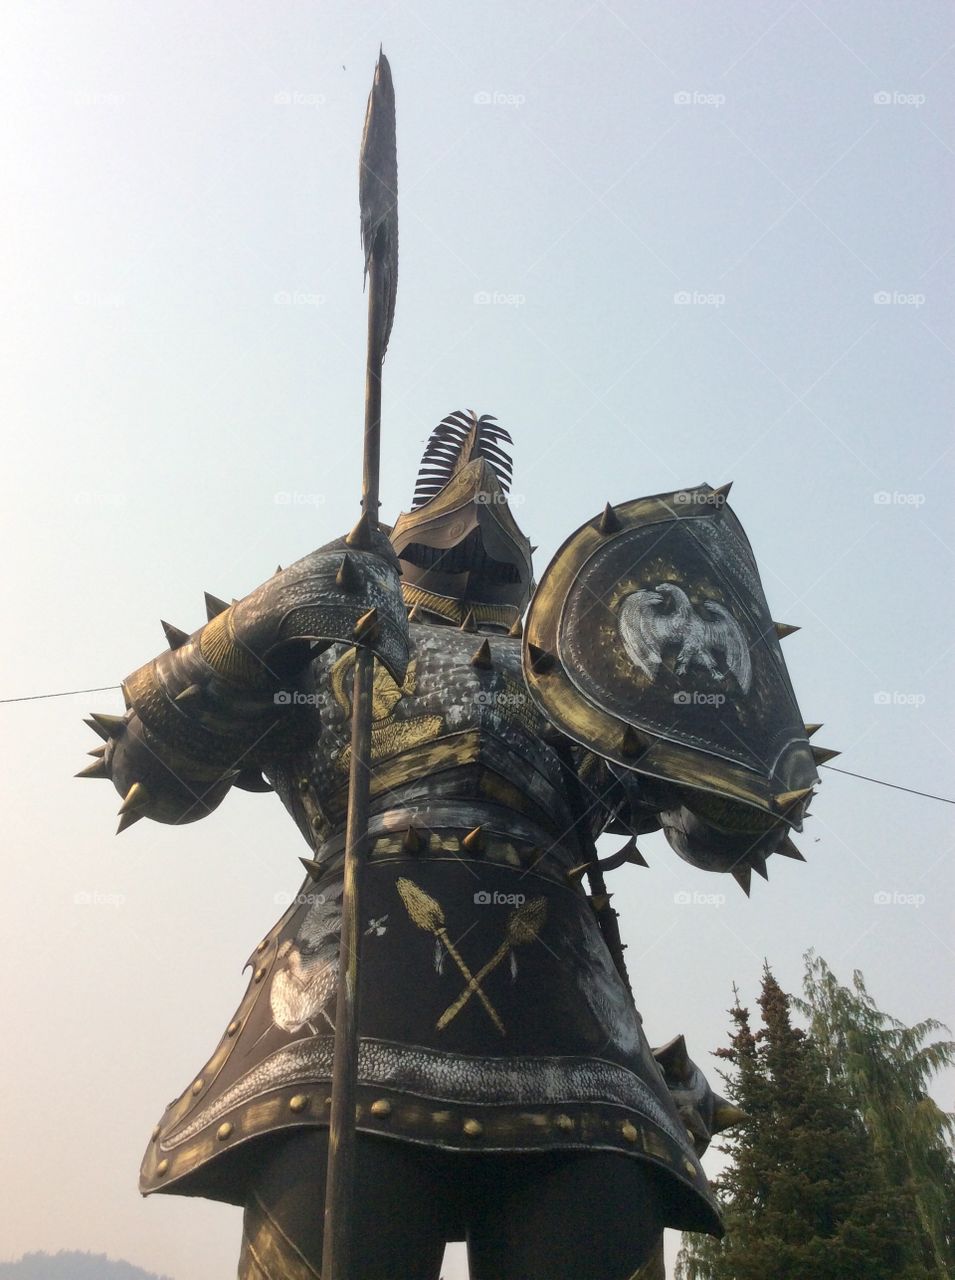 A large outdoor ornate statue of a knight, heroically posed with his axe and shield.